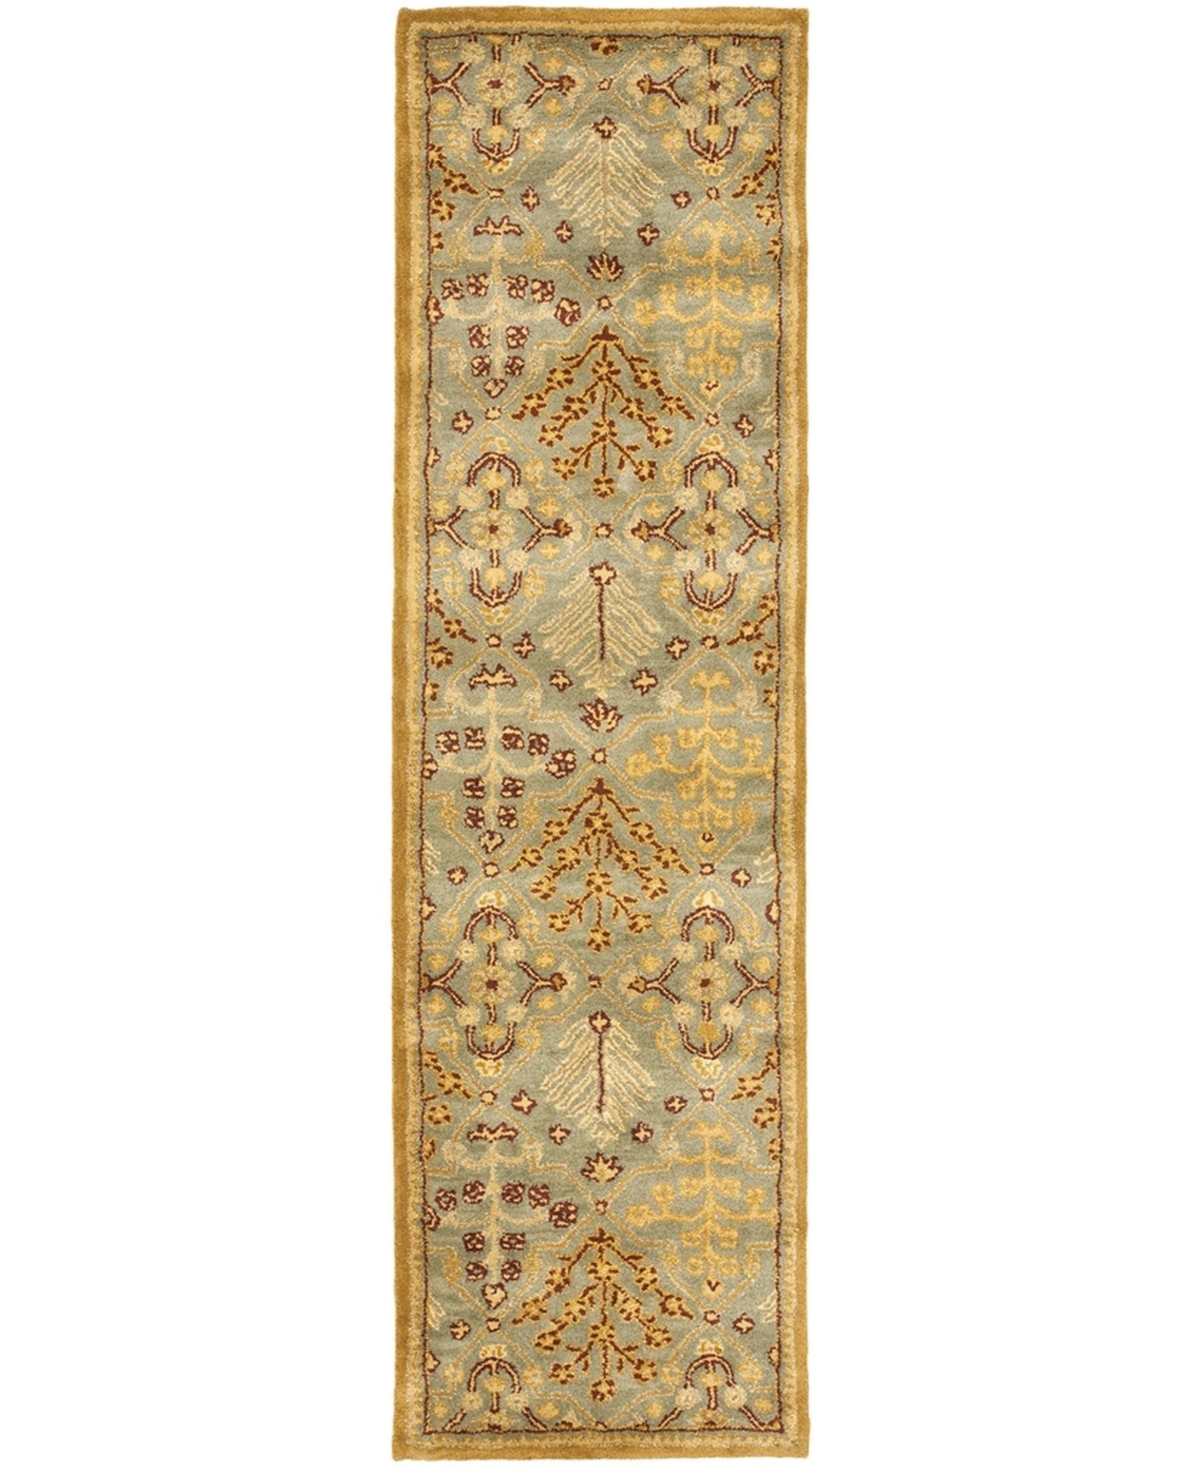 Safavieh Antiquity At613 Mist and Gold 2'3in x 20' Runner Area Rug - Mist